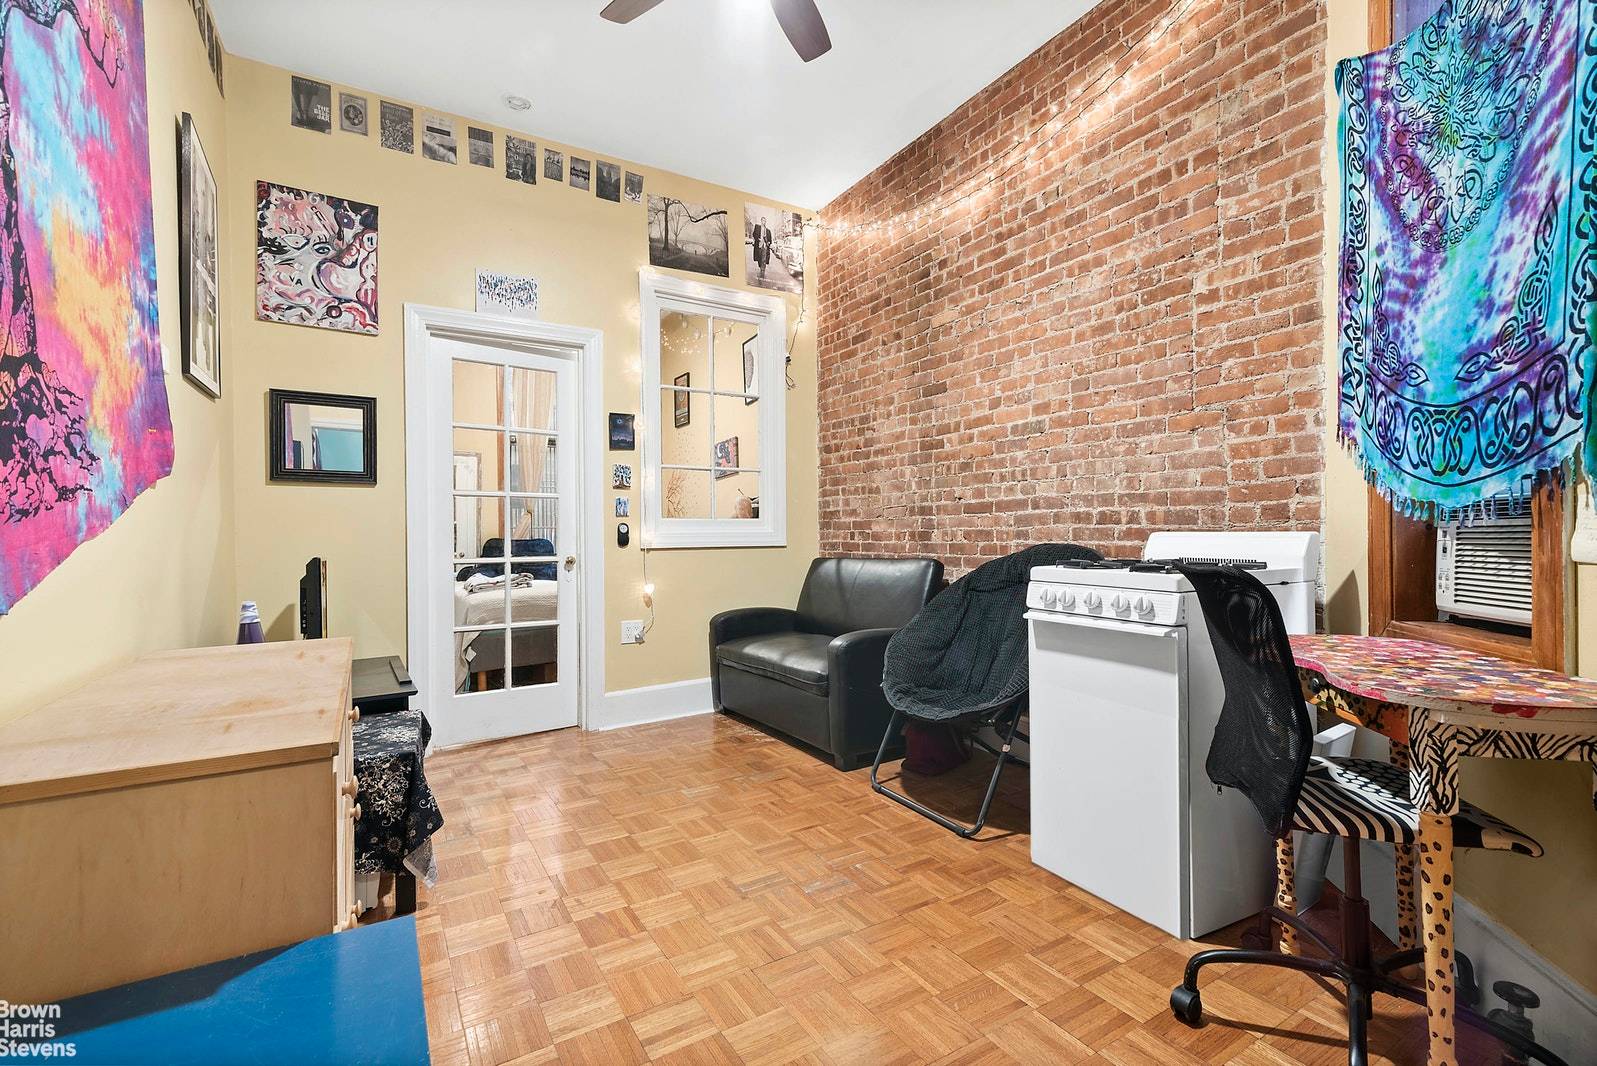 Apartment features sunny western exposure over looking Sullivan Street, just refinished hardwood floors, full sized kitchen appliances, tiled bathroom, and ample sized bedrooms easily accommodating queen beds plus additional furniture.